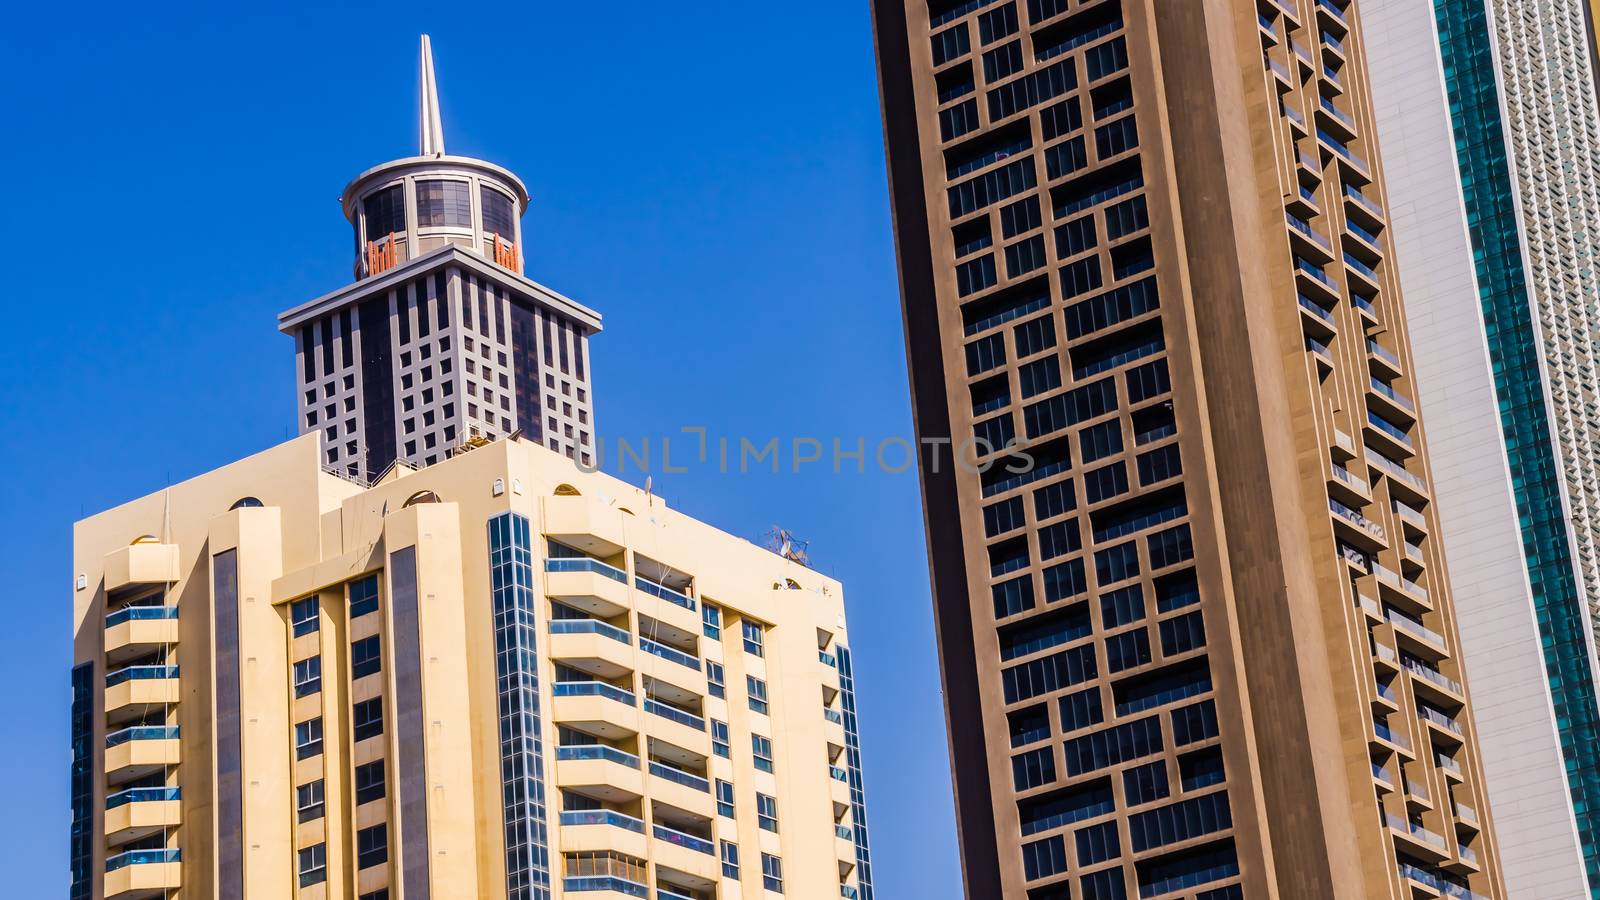 Stunning examples of architectural styles in Dubai by pawel_szczepanski